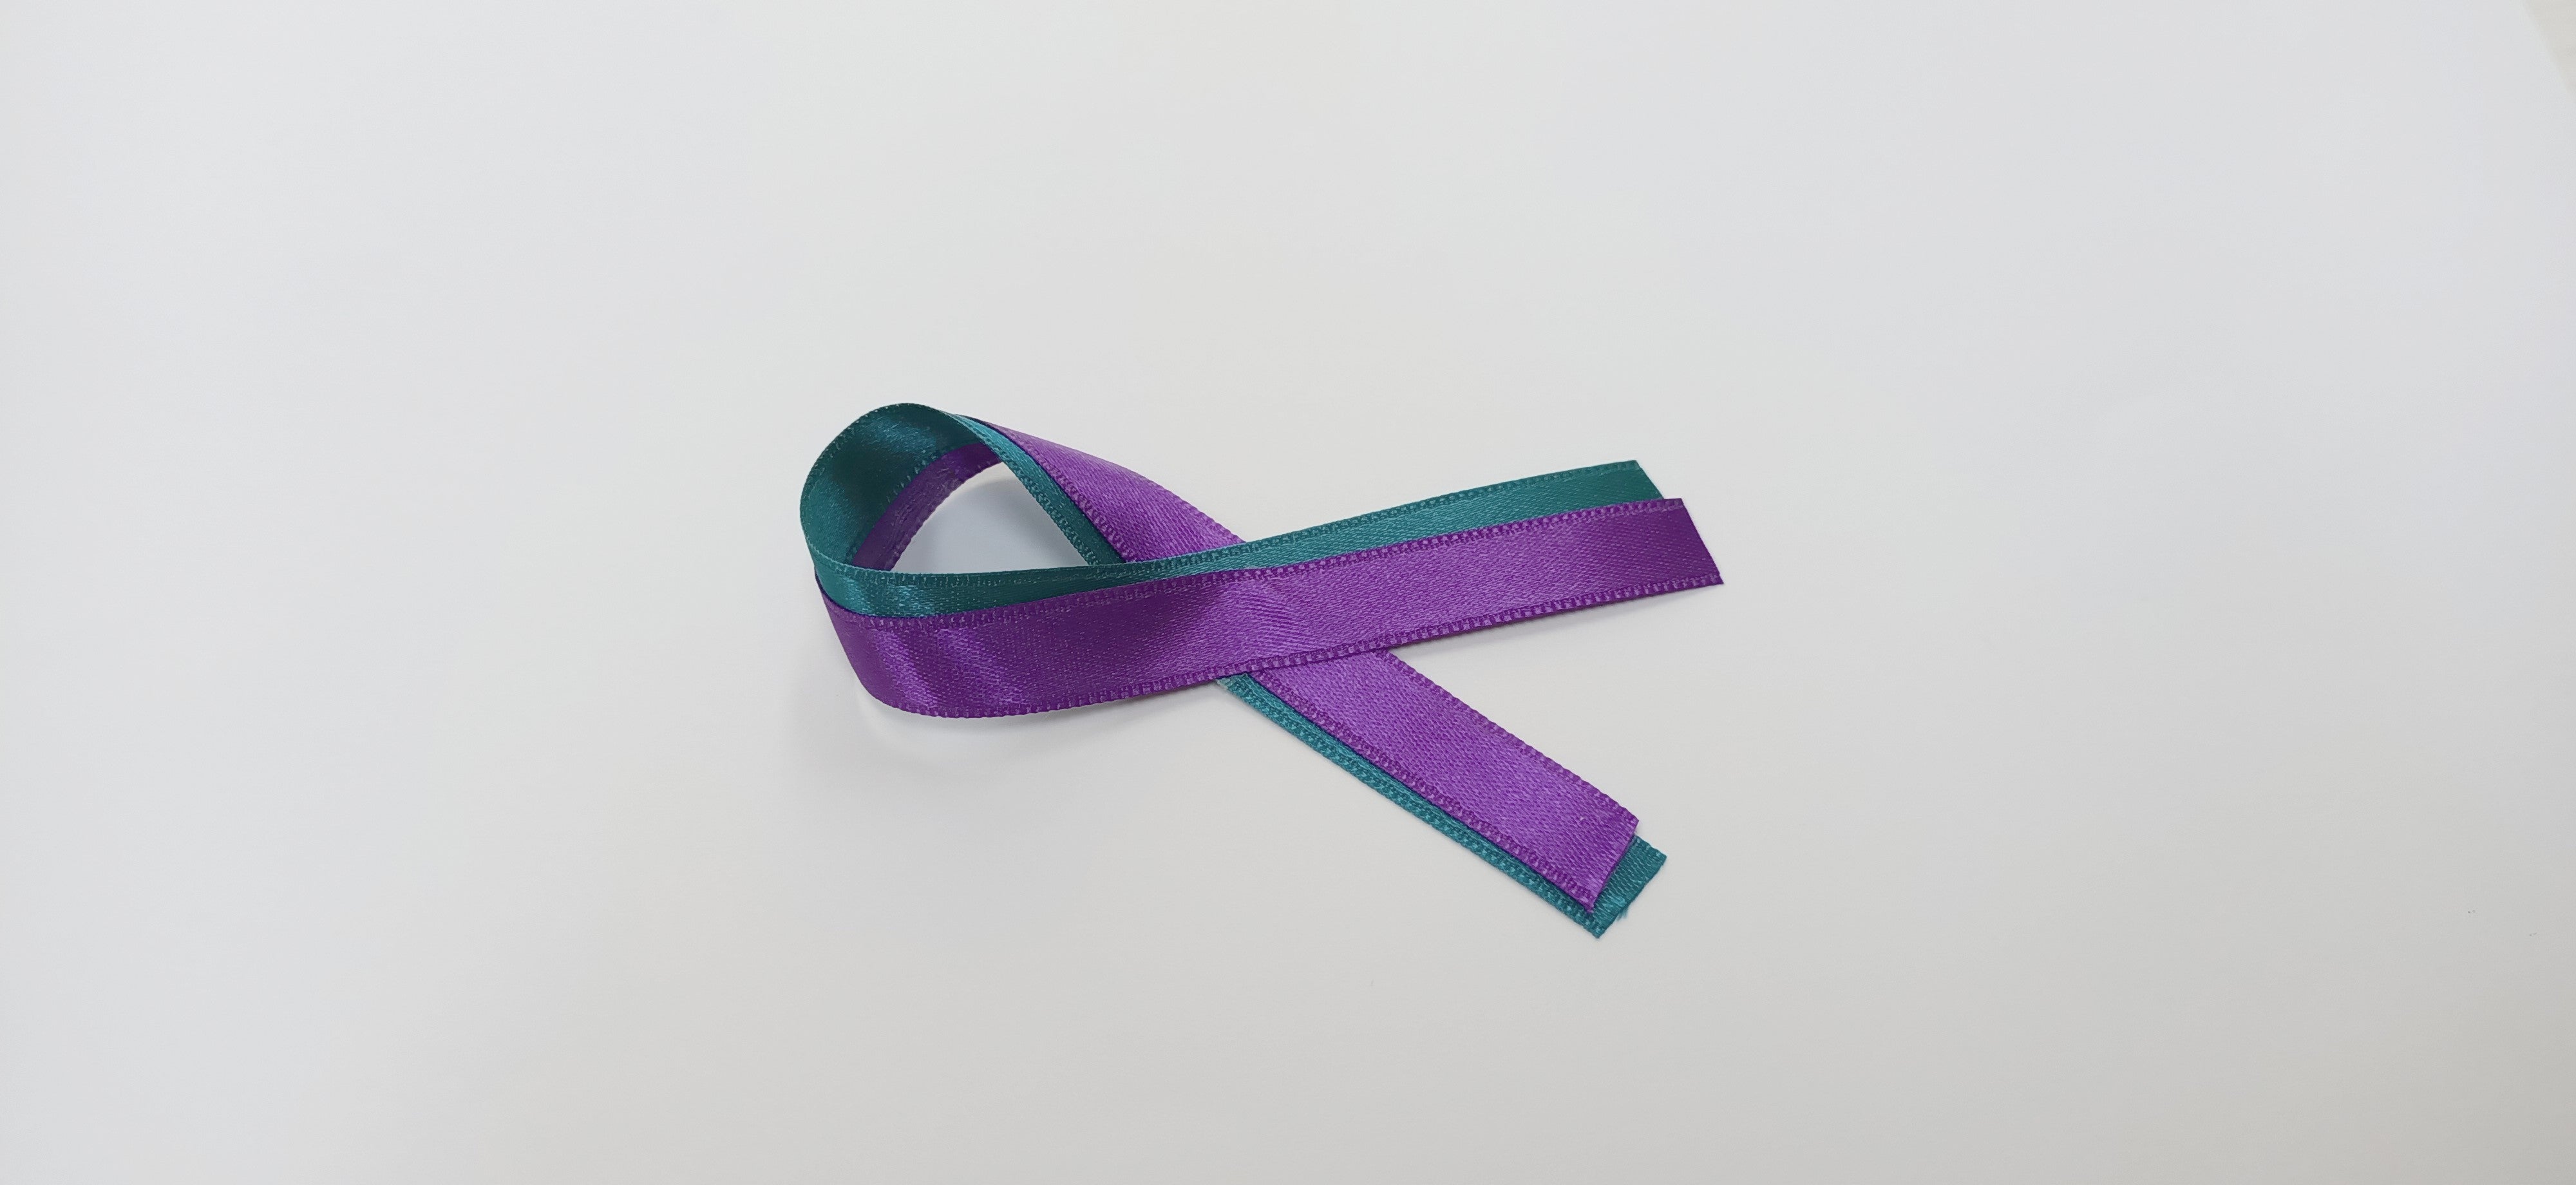 The story behind the Purple Ribbon